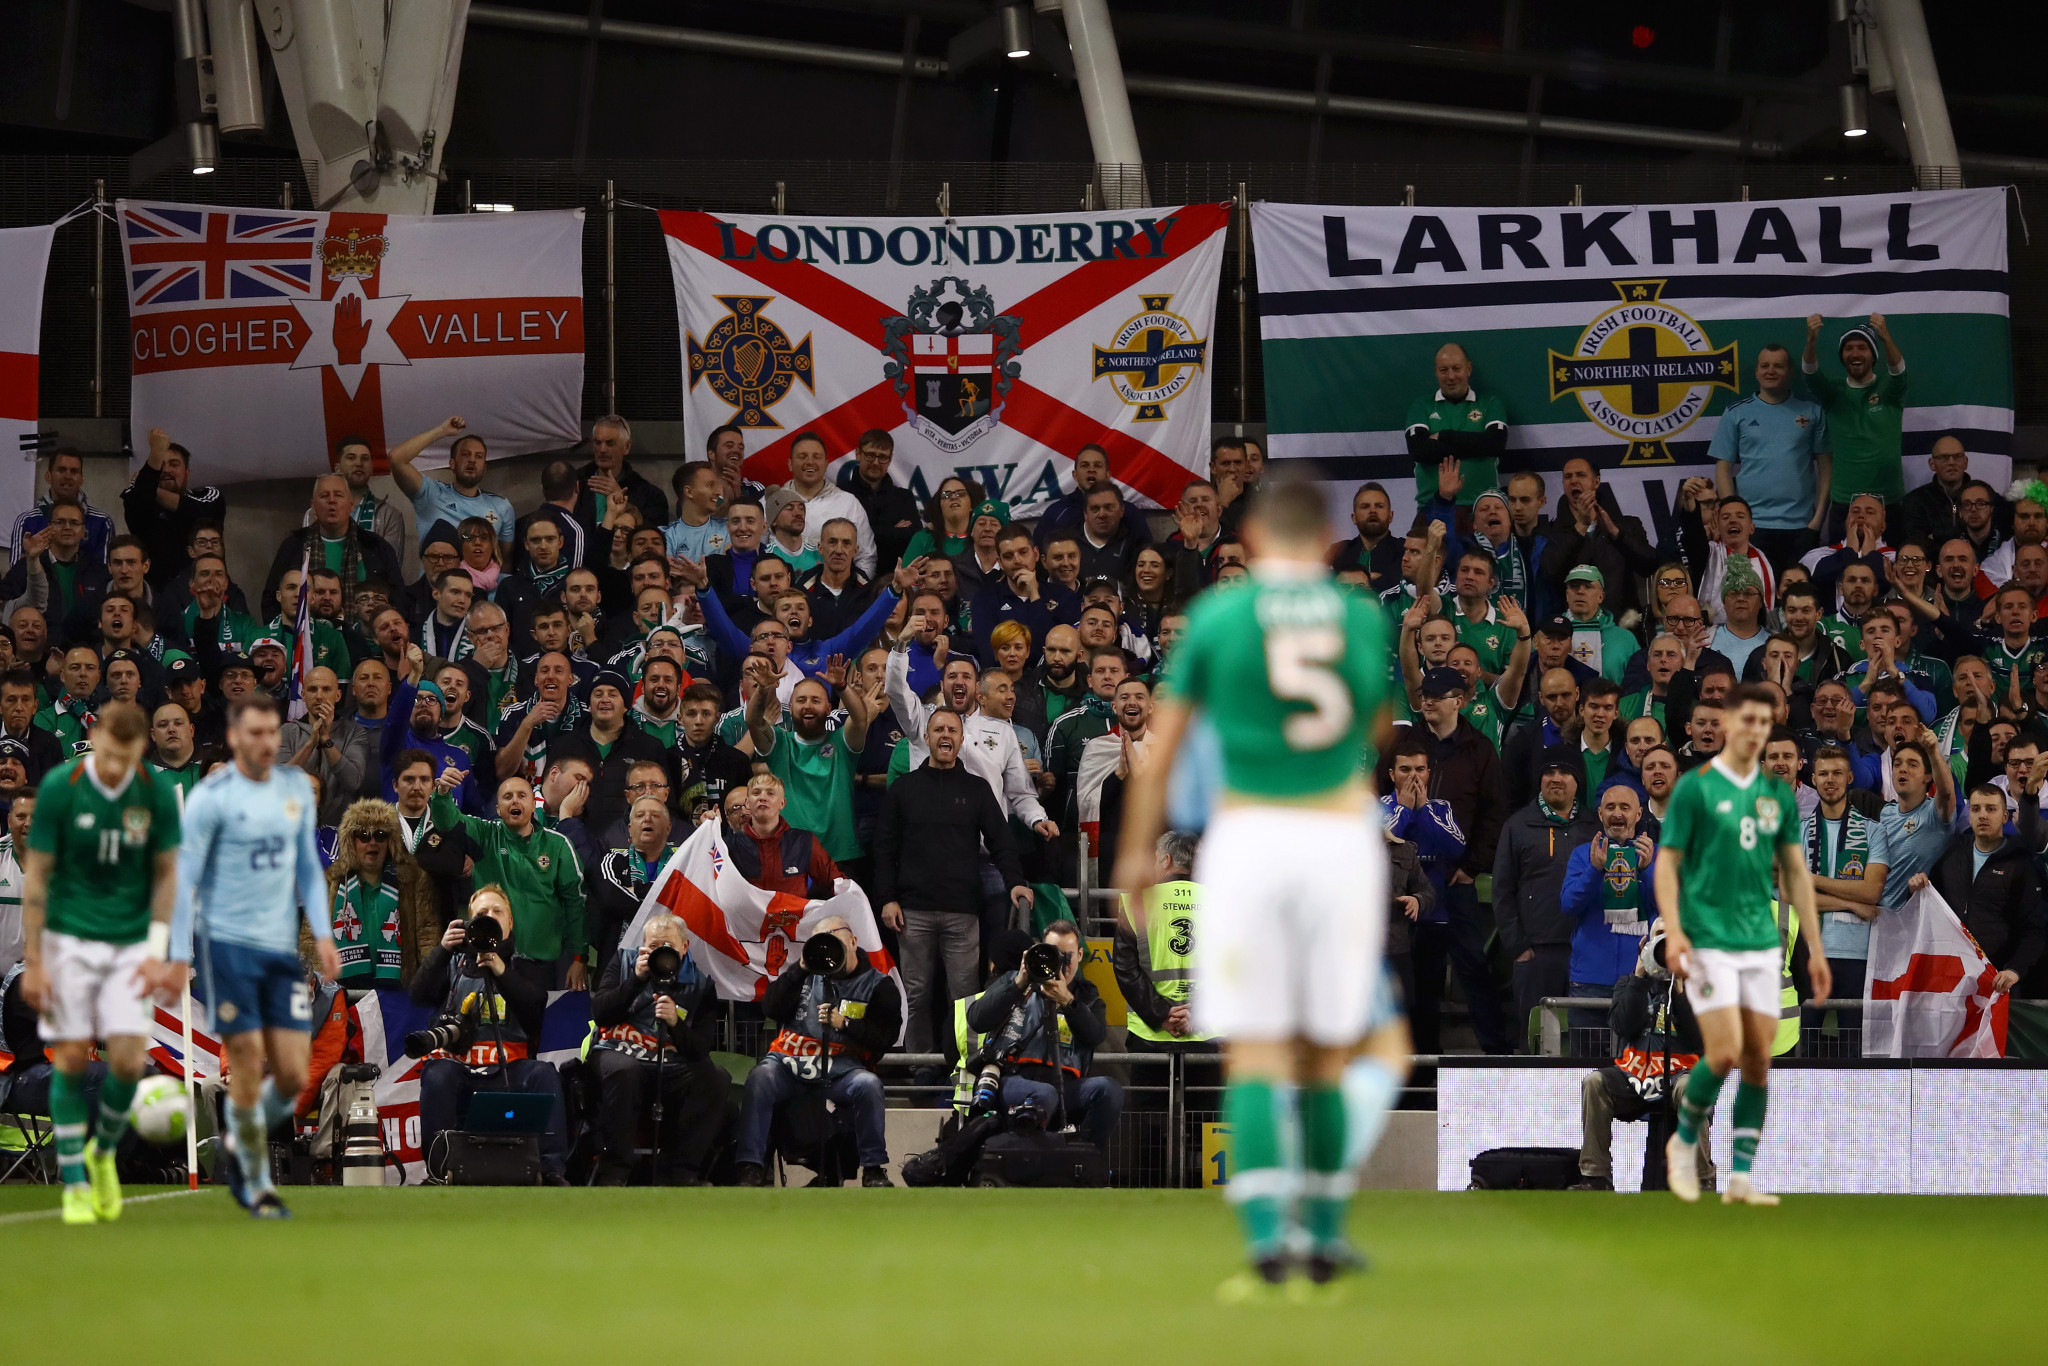 The Republic of Ireland and Northern Ireland last played in a friendly in November 2018, which ended goalless ©Getty Images